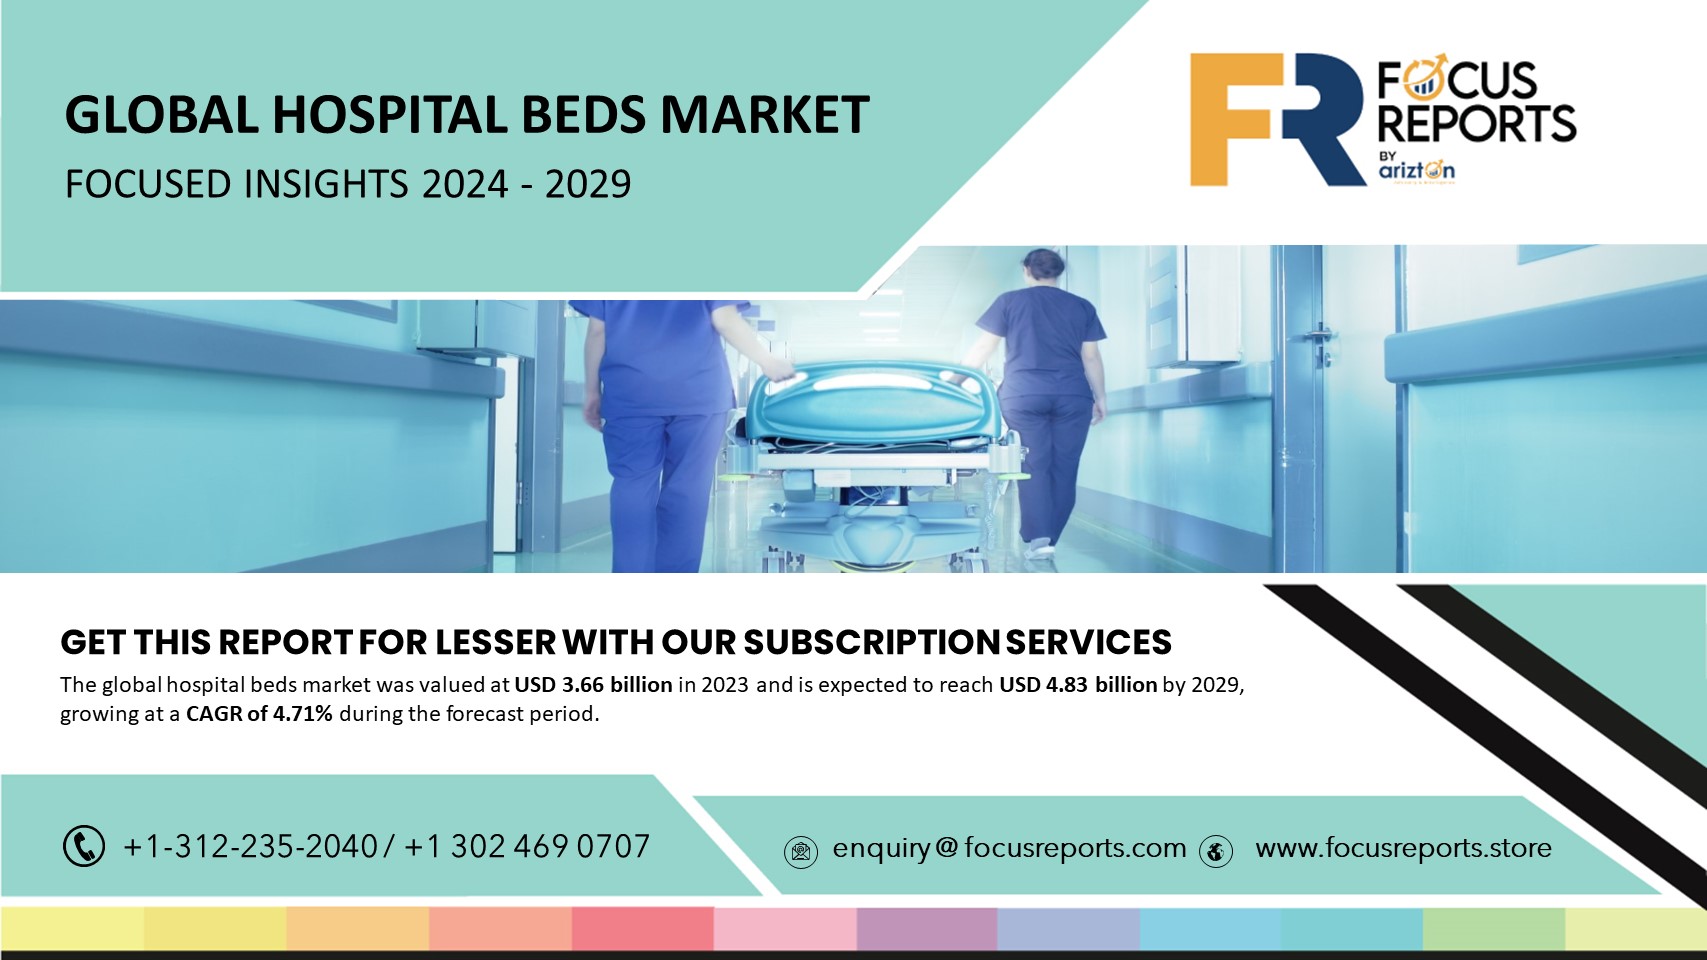 The Global Hospital Beds Market to Reach $4.83 Billion by 2029 - Exclusive Focus Insight Report by Arizton 